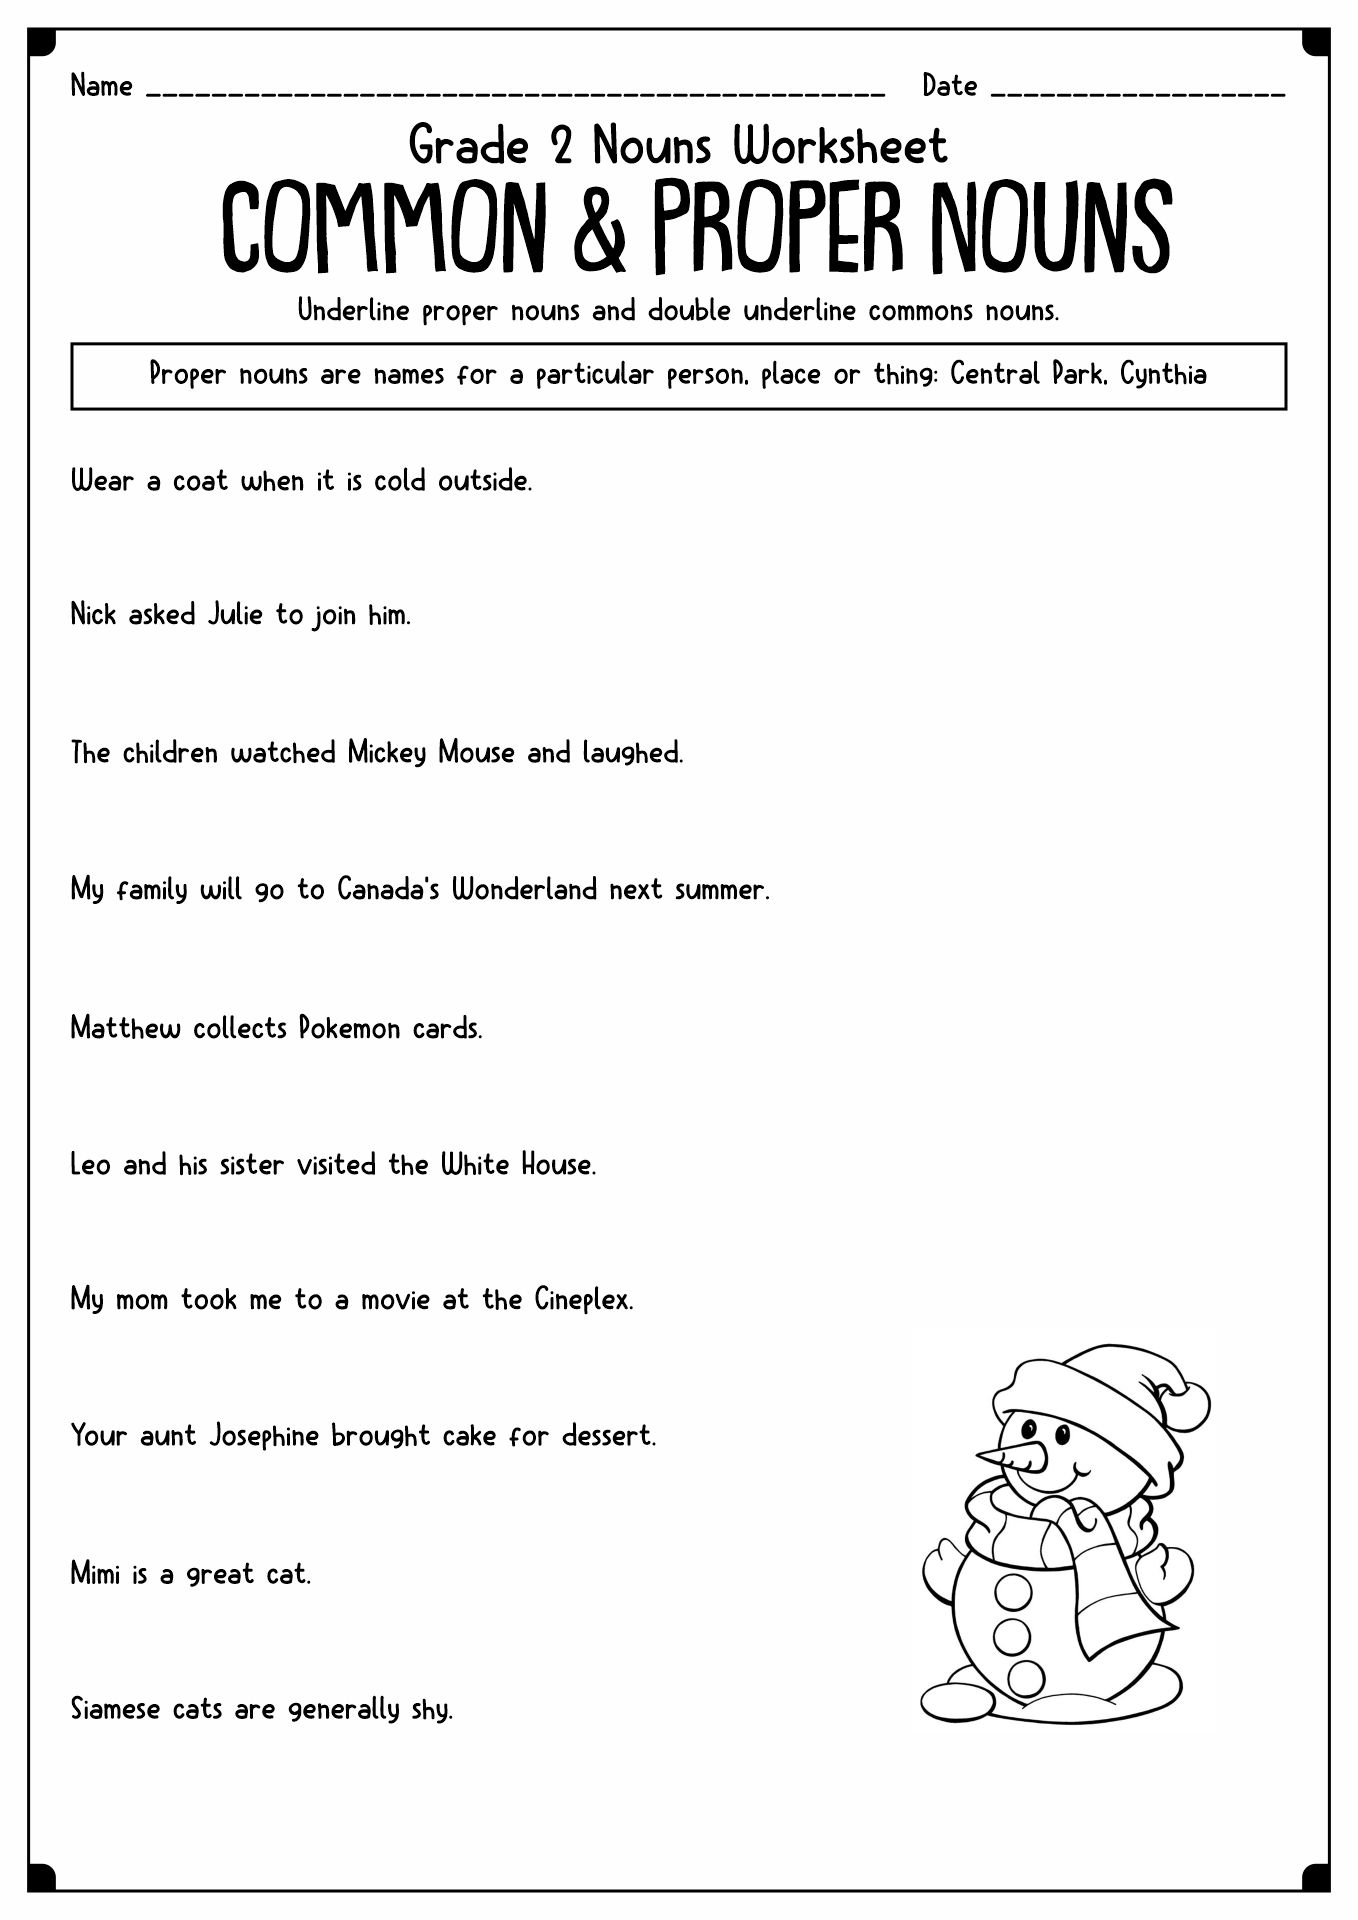 Common and Proper Nouns Worksheets